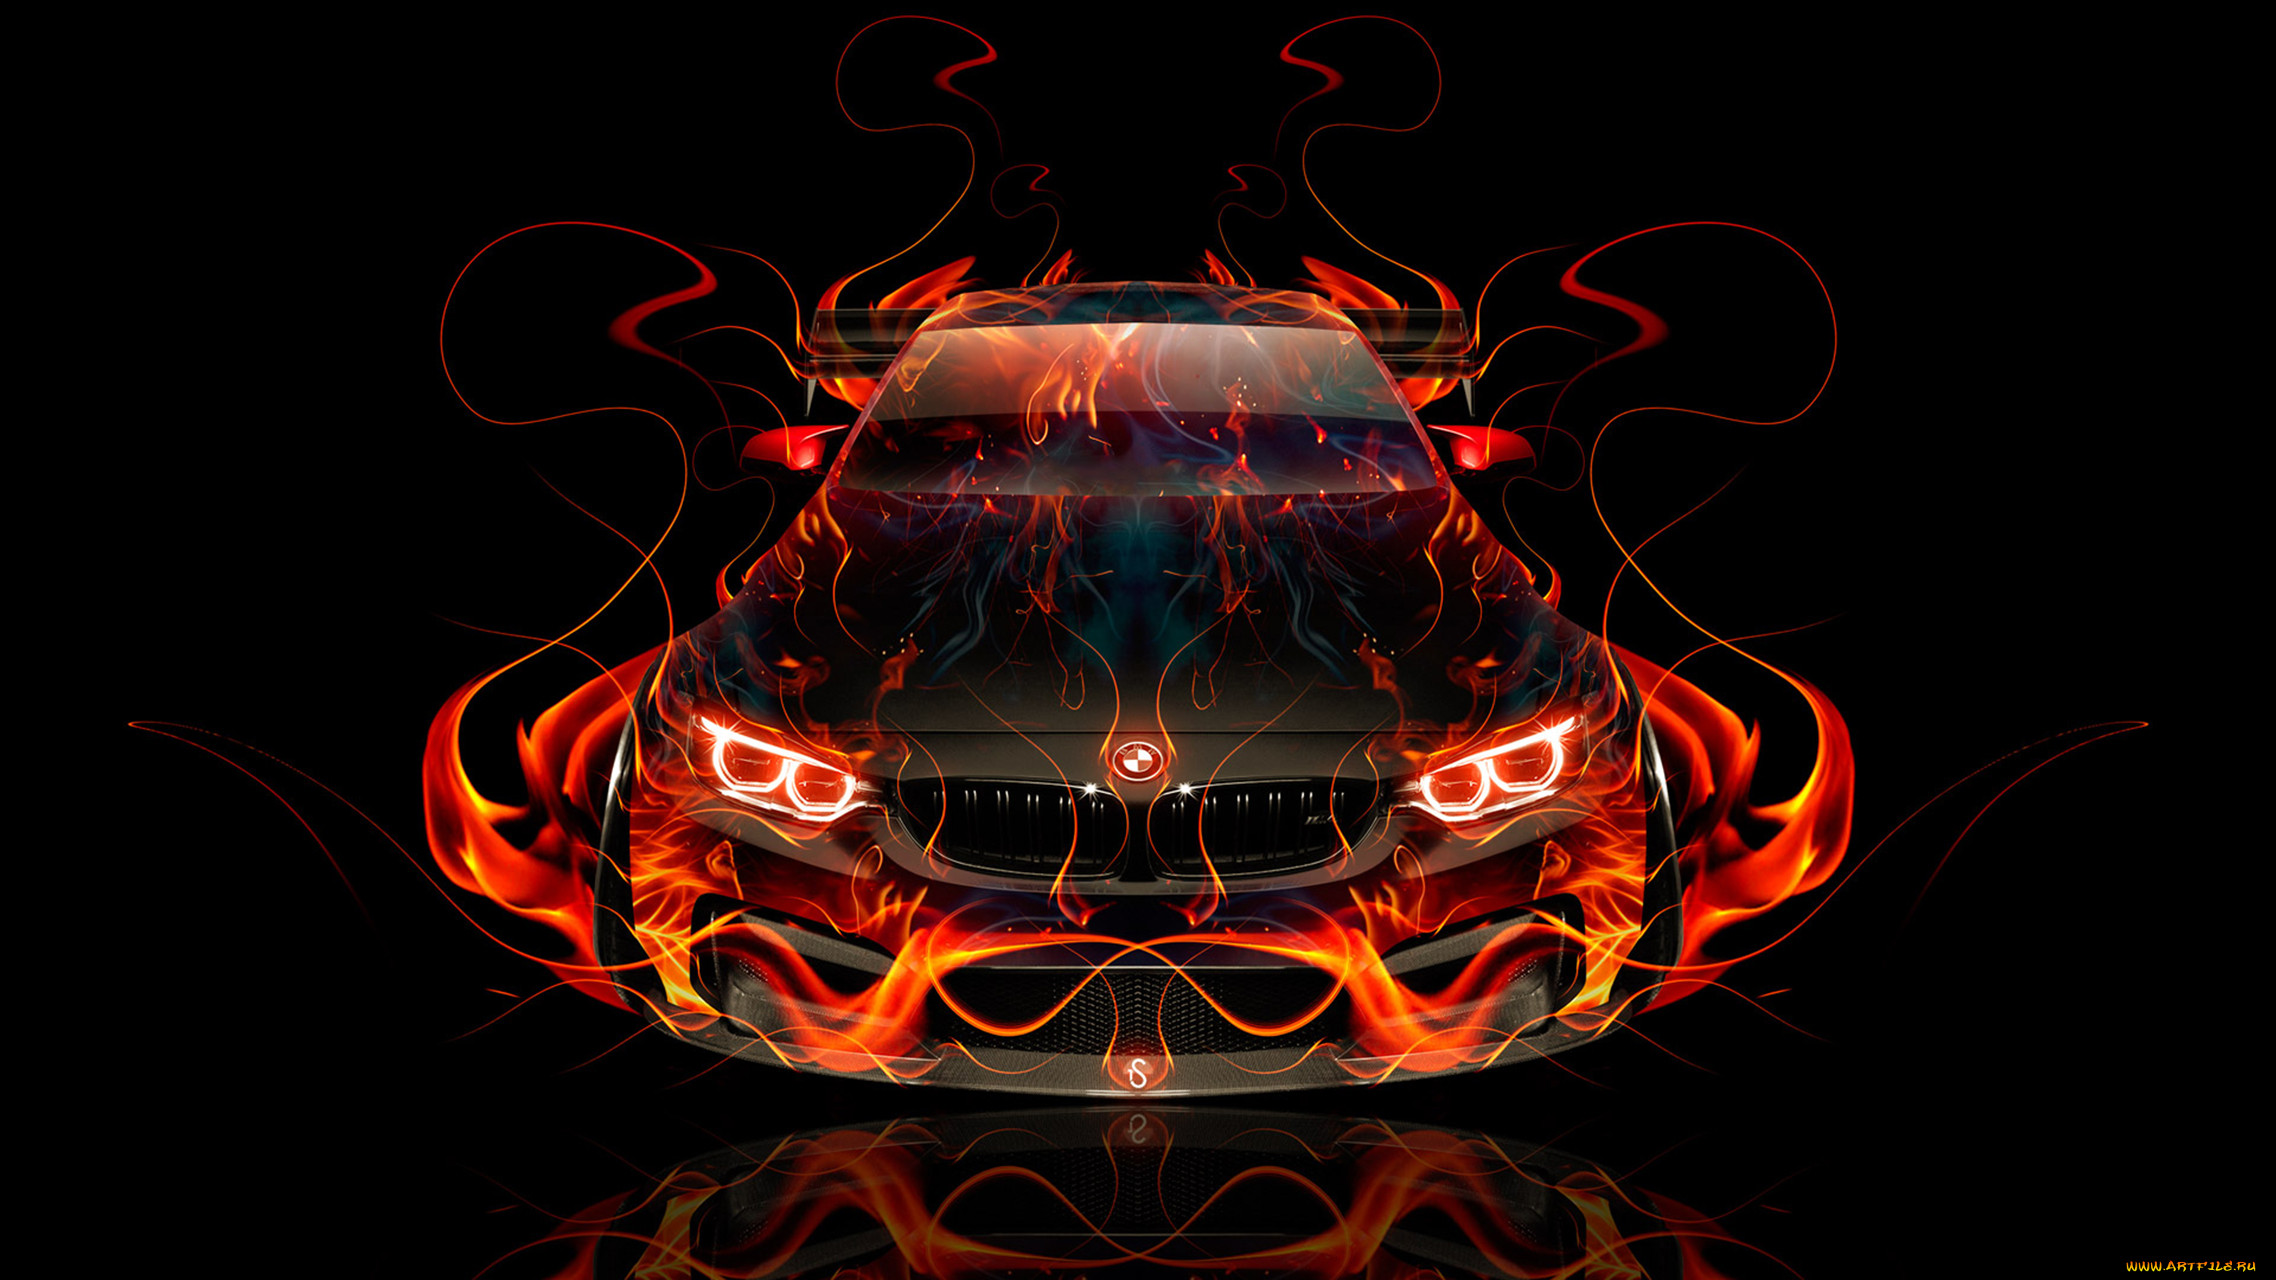 bmw m4 tuning frontup super fire abstract car 2016, , 3, bmw, m4, tuning, frontup, super, fire, abstract, car, 2016